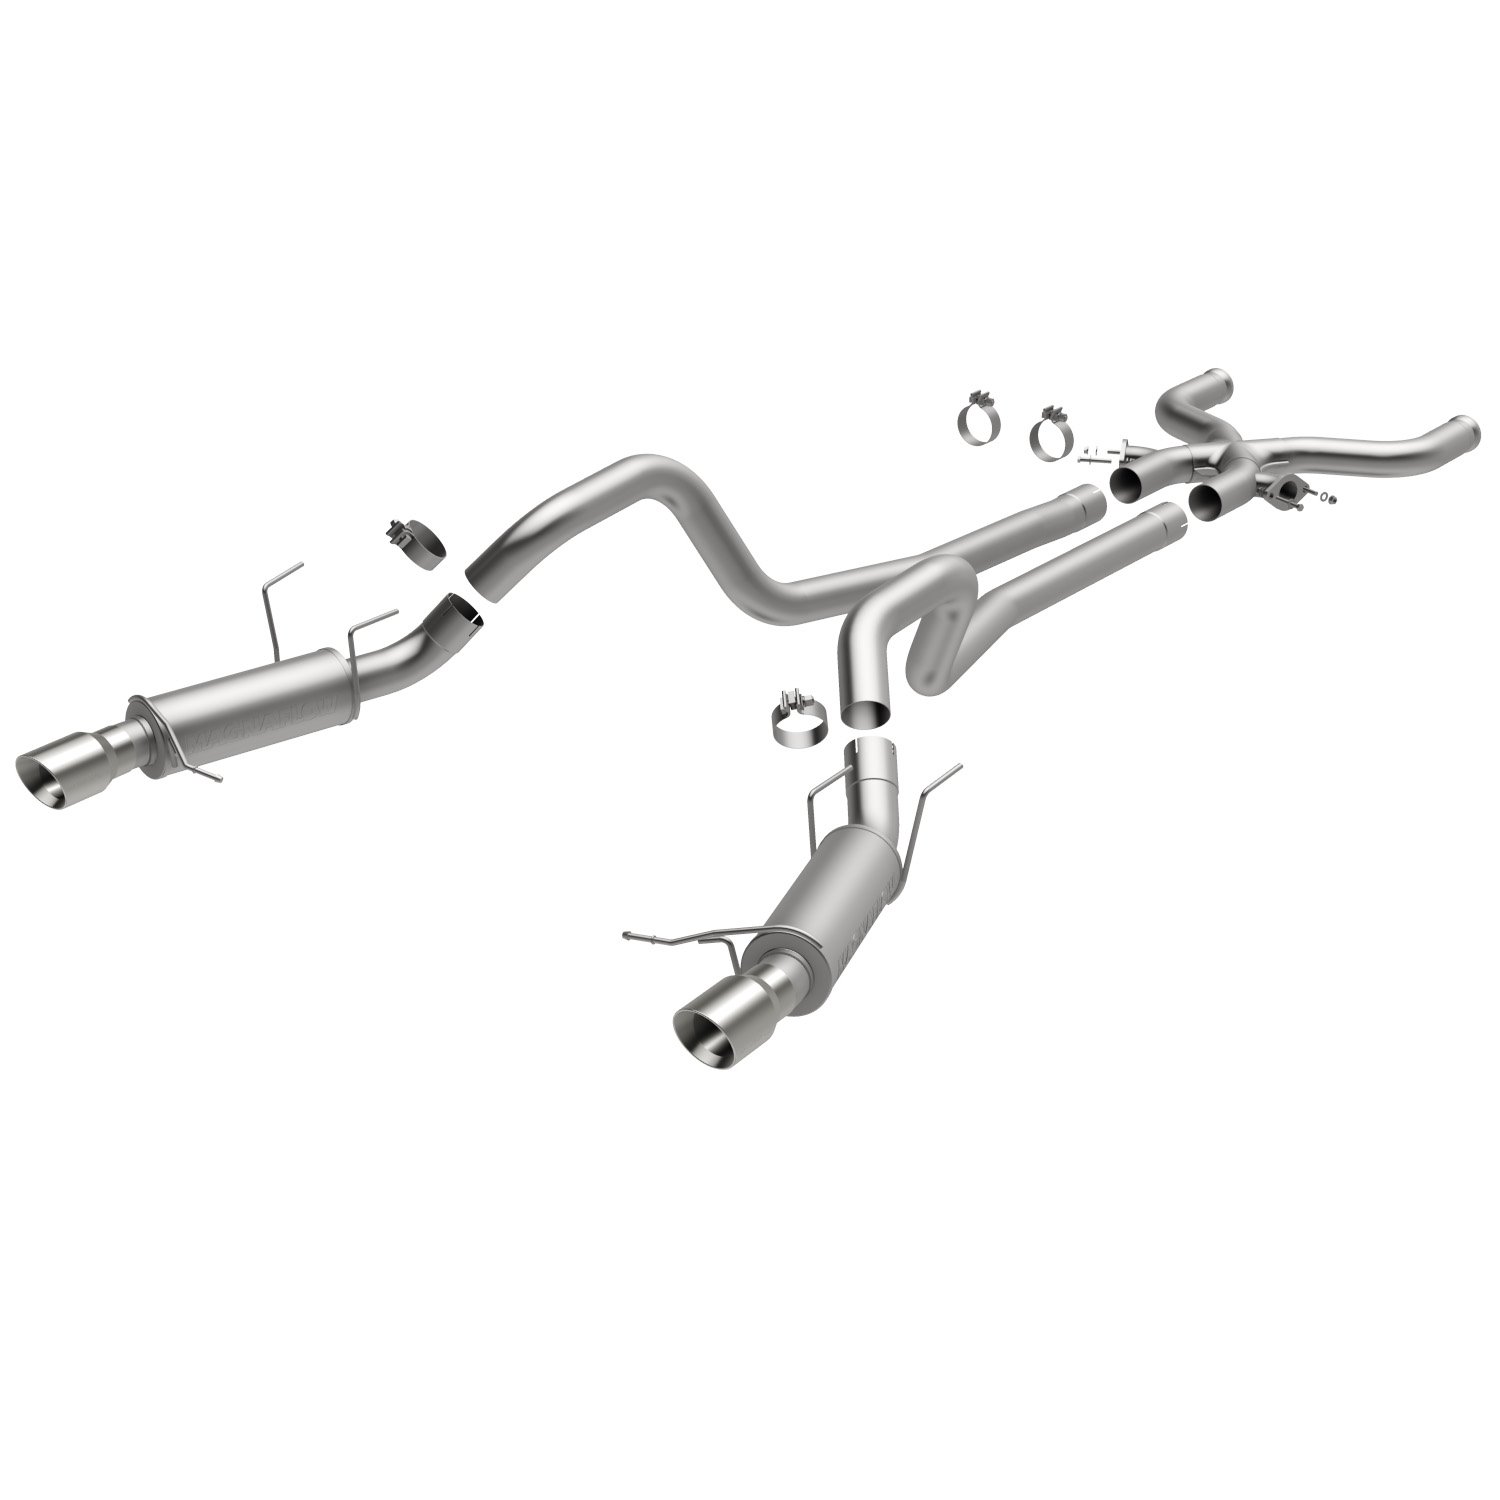 Competition Series Cat-Back Exhaust System 2012-2014 Mustang Boss 302 5.0L V8